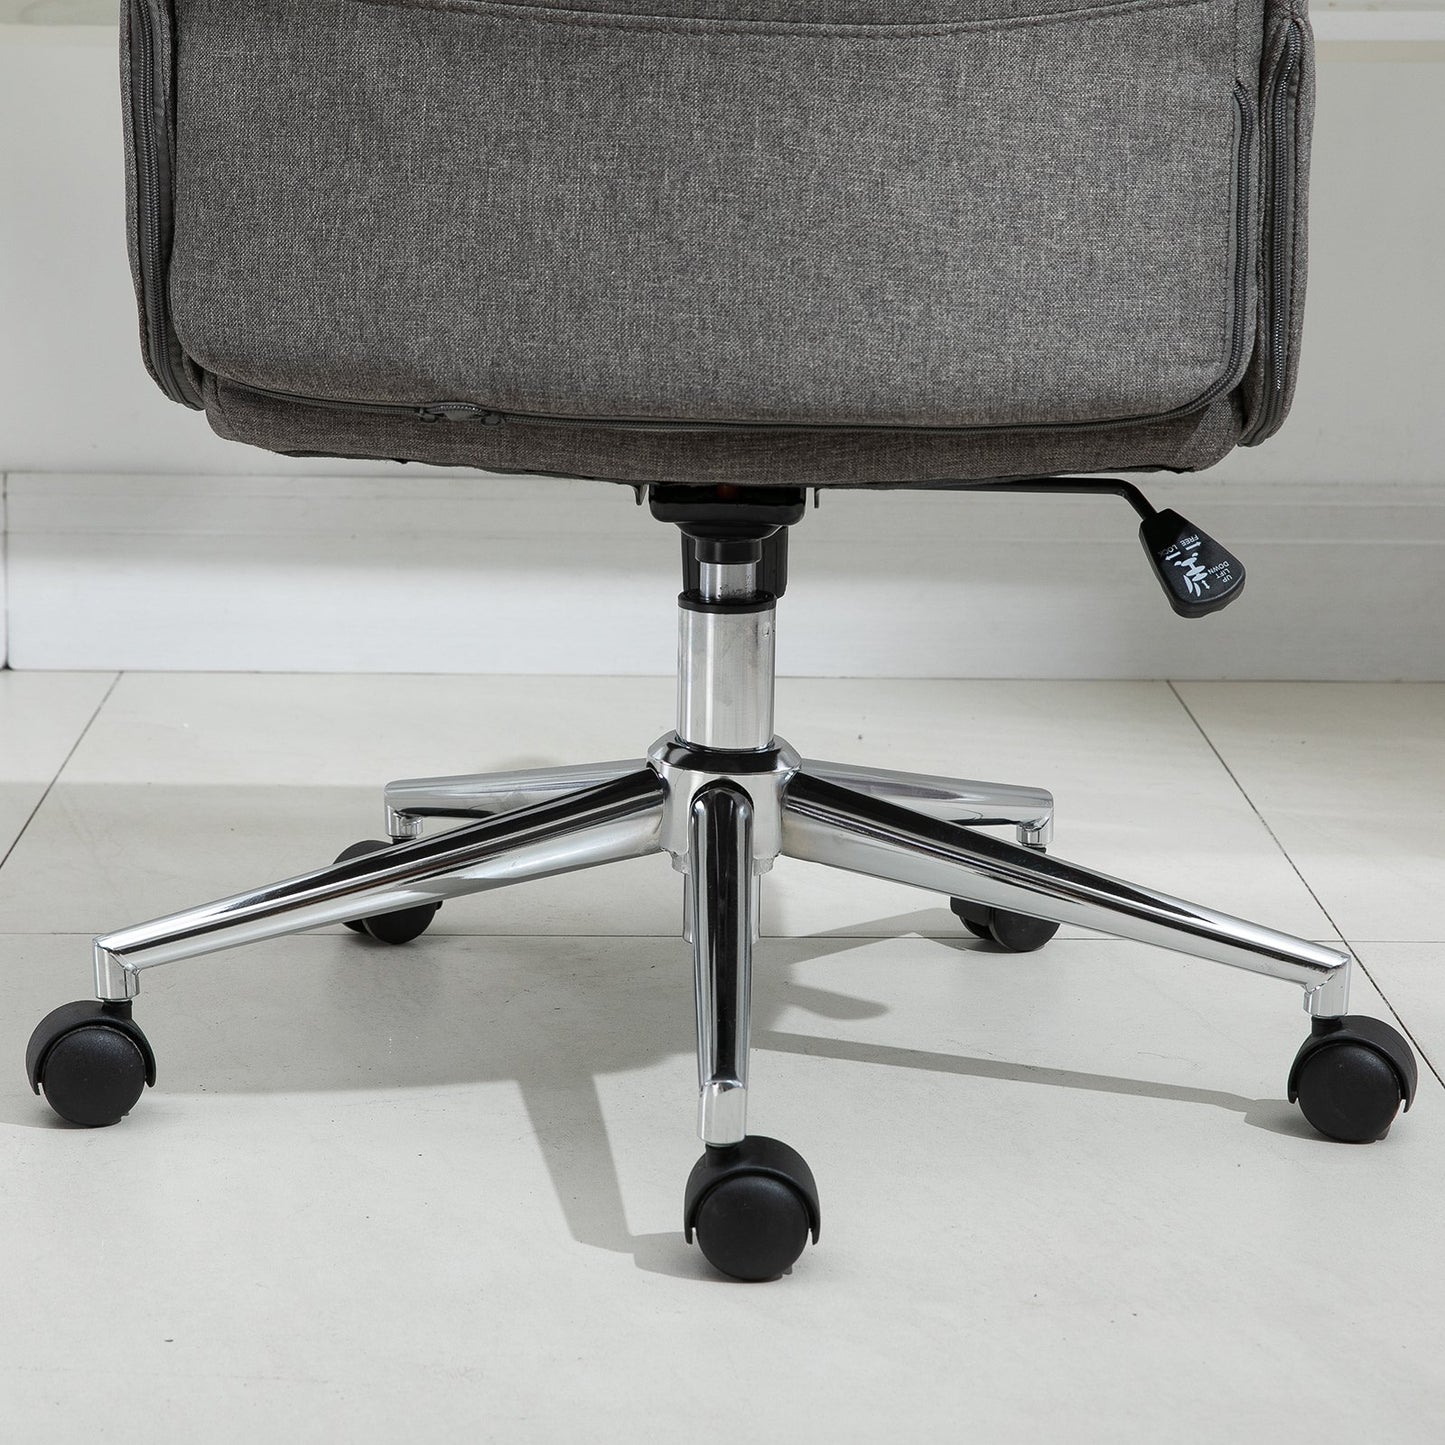 Vinsetto Rocking Office Desk Chair w/ Arm Rest on Wheels Adjustable Height Light Grey